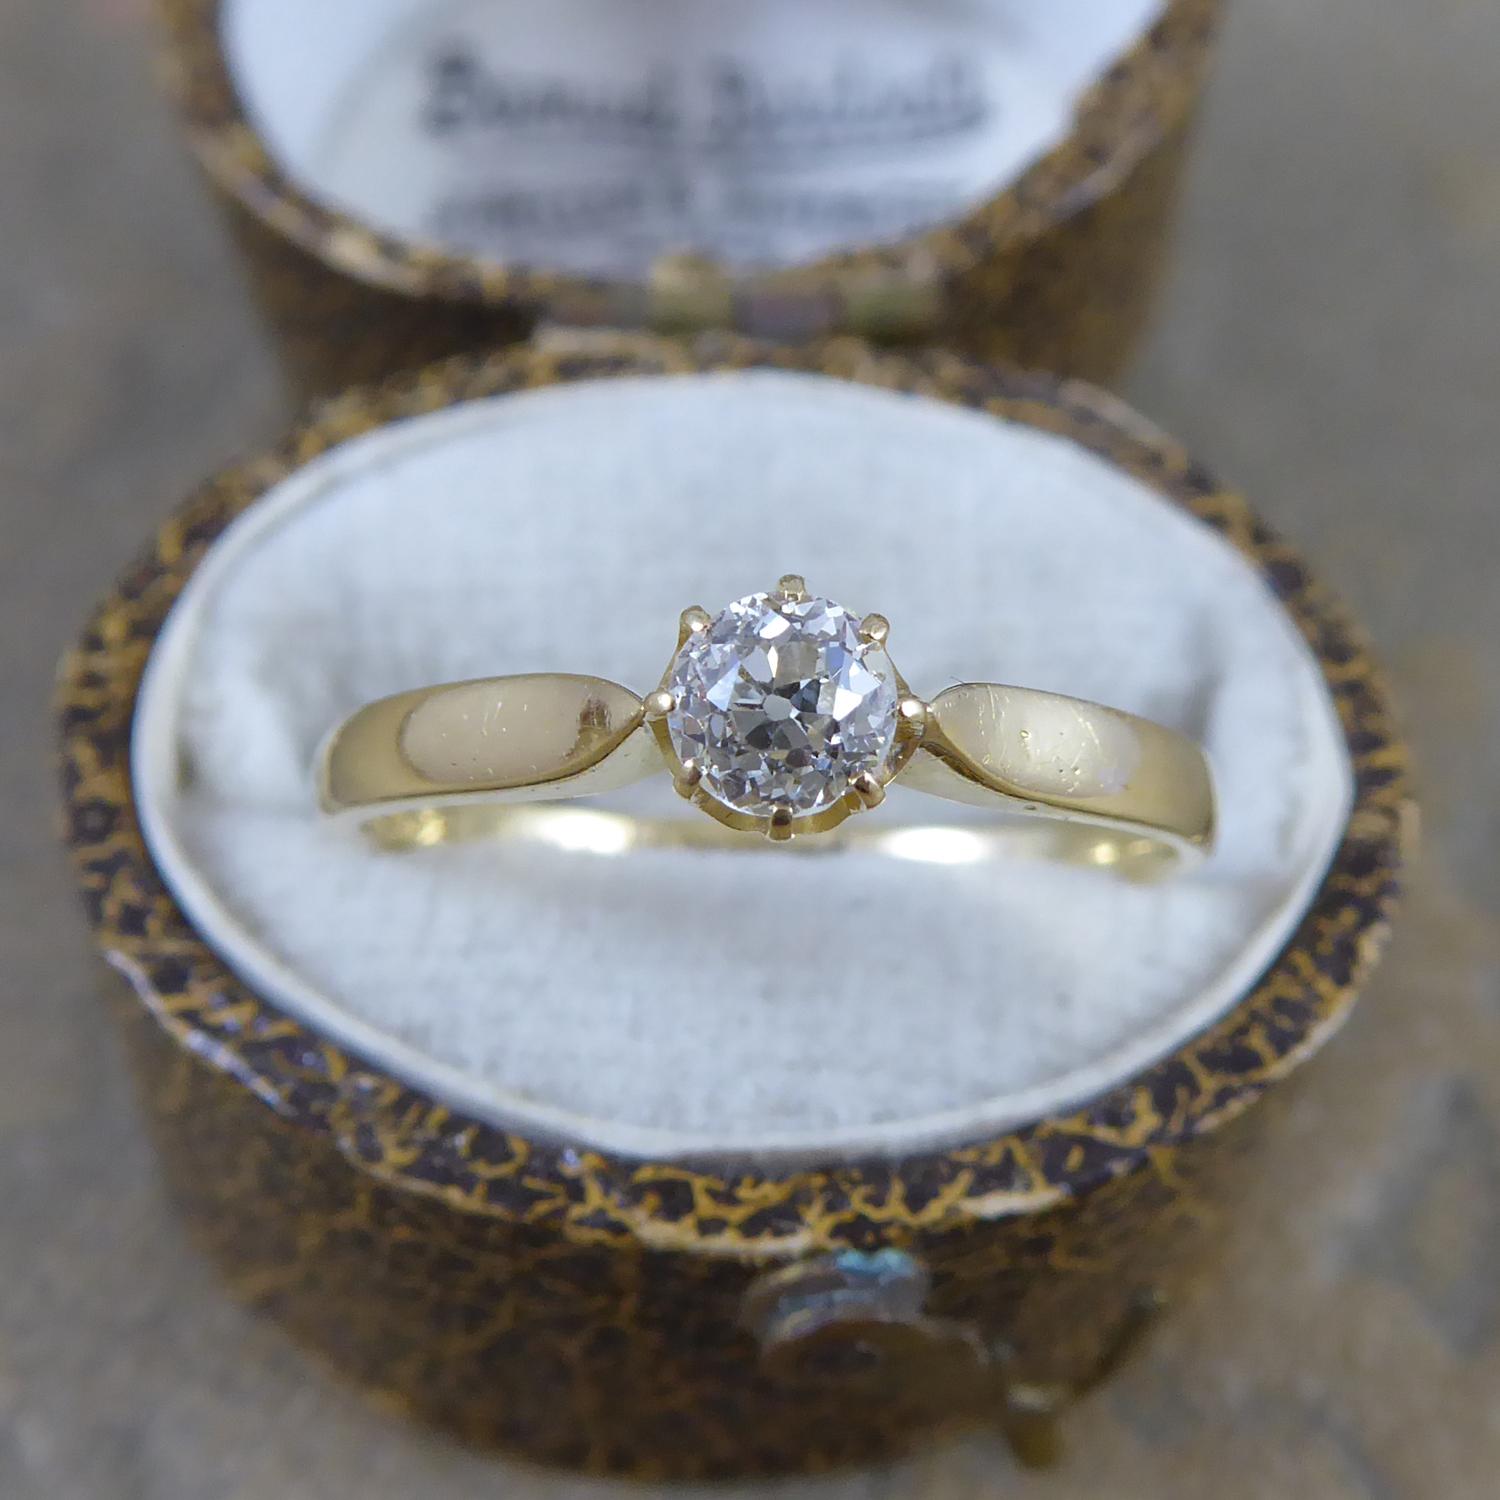 An antique ring set with an old cut diamond approx.  0.23ct  claw set in yellow gold to raised and pointed shoulders to a D-shaped, cross-sectioned gold band hallmarked 18ct yellow gold  at the Birmingham Assay Office for the year 1899.  A perfectly